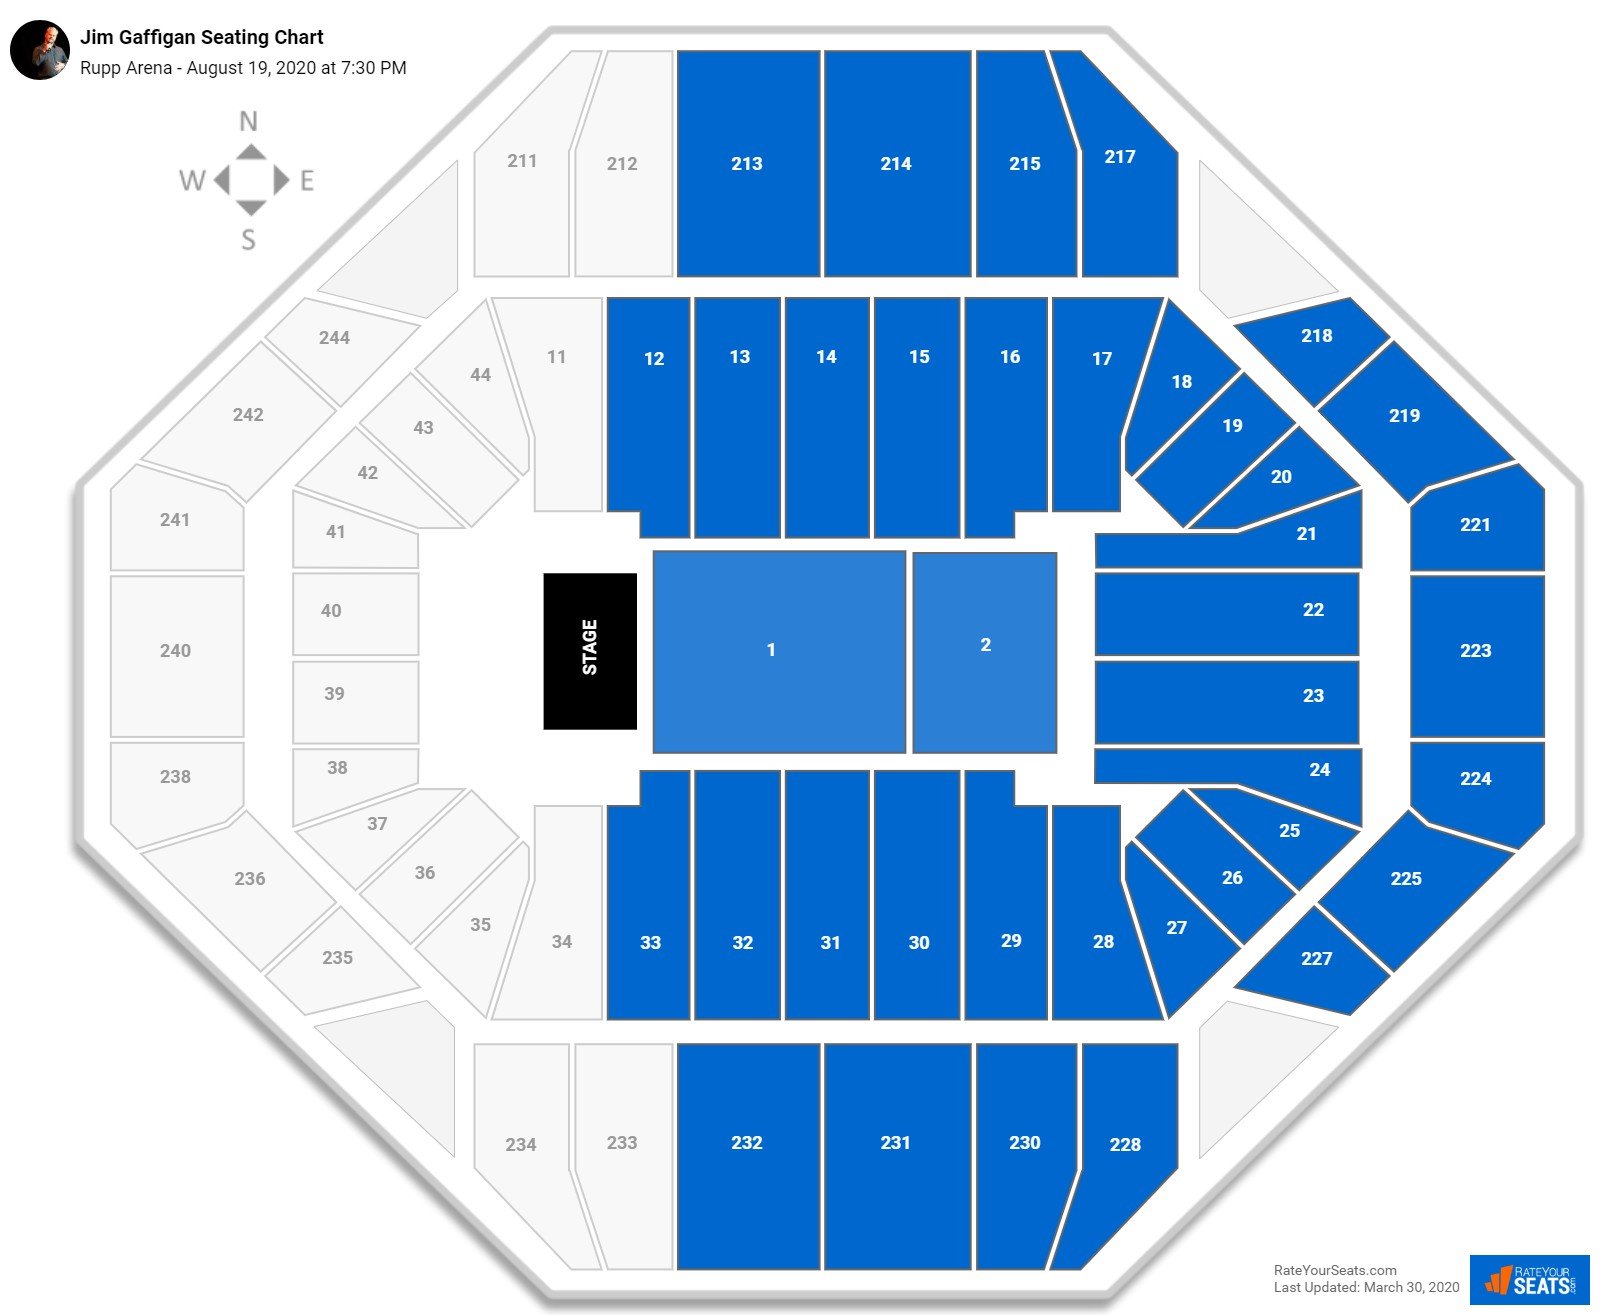 Rupp Arena Seating Charts for Concerts